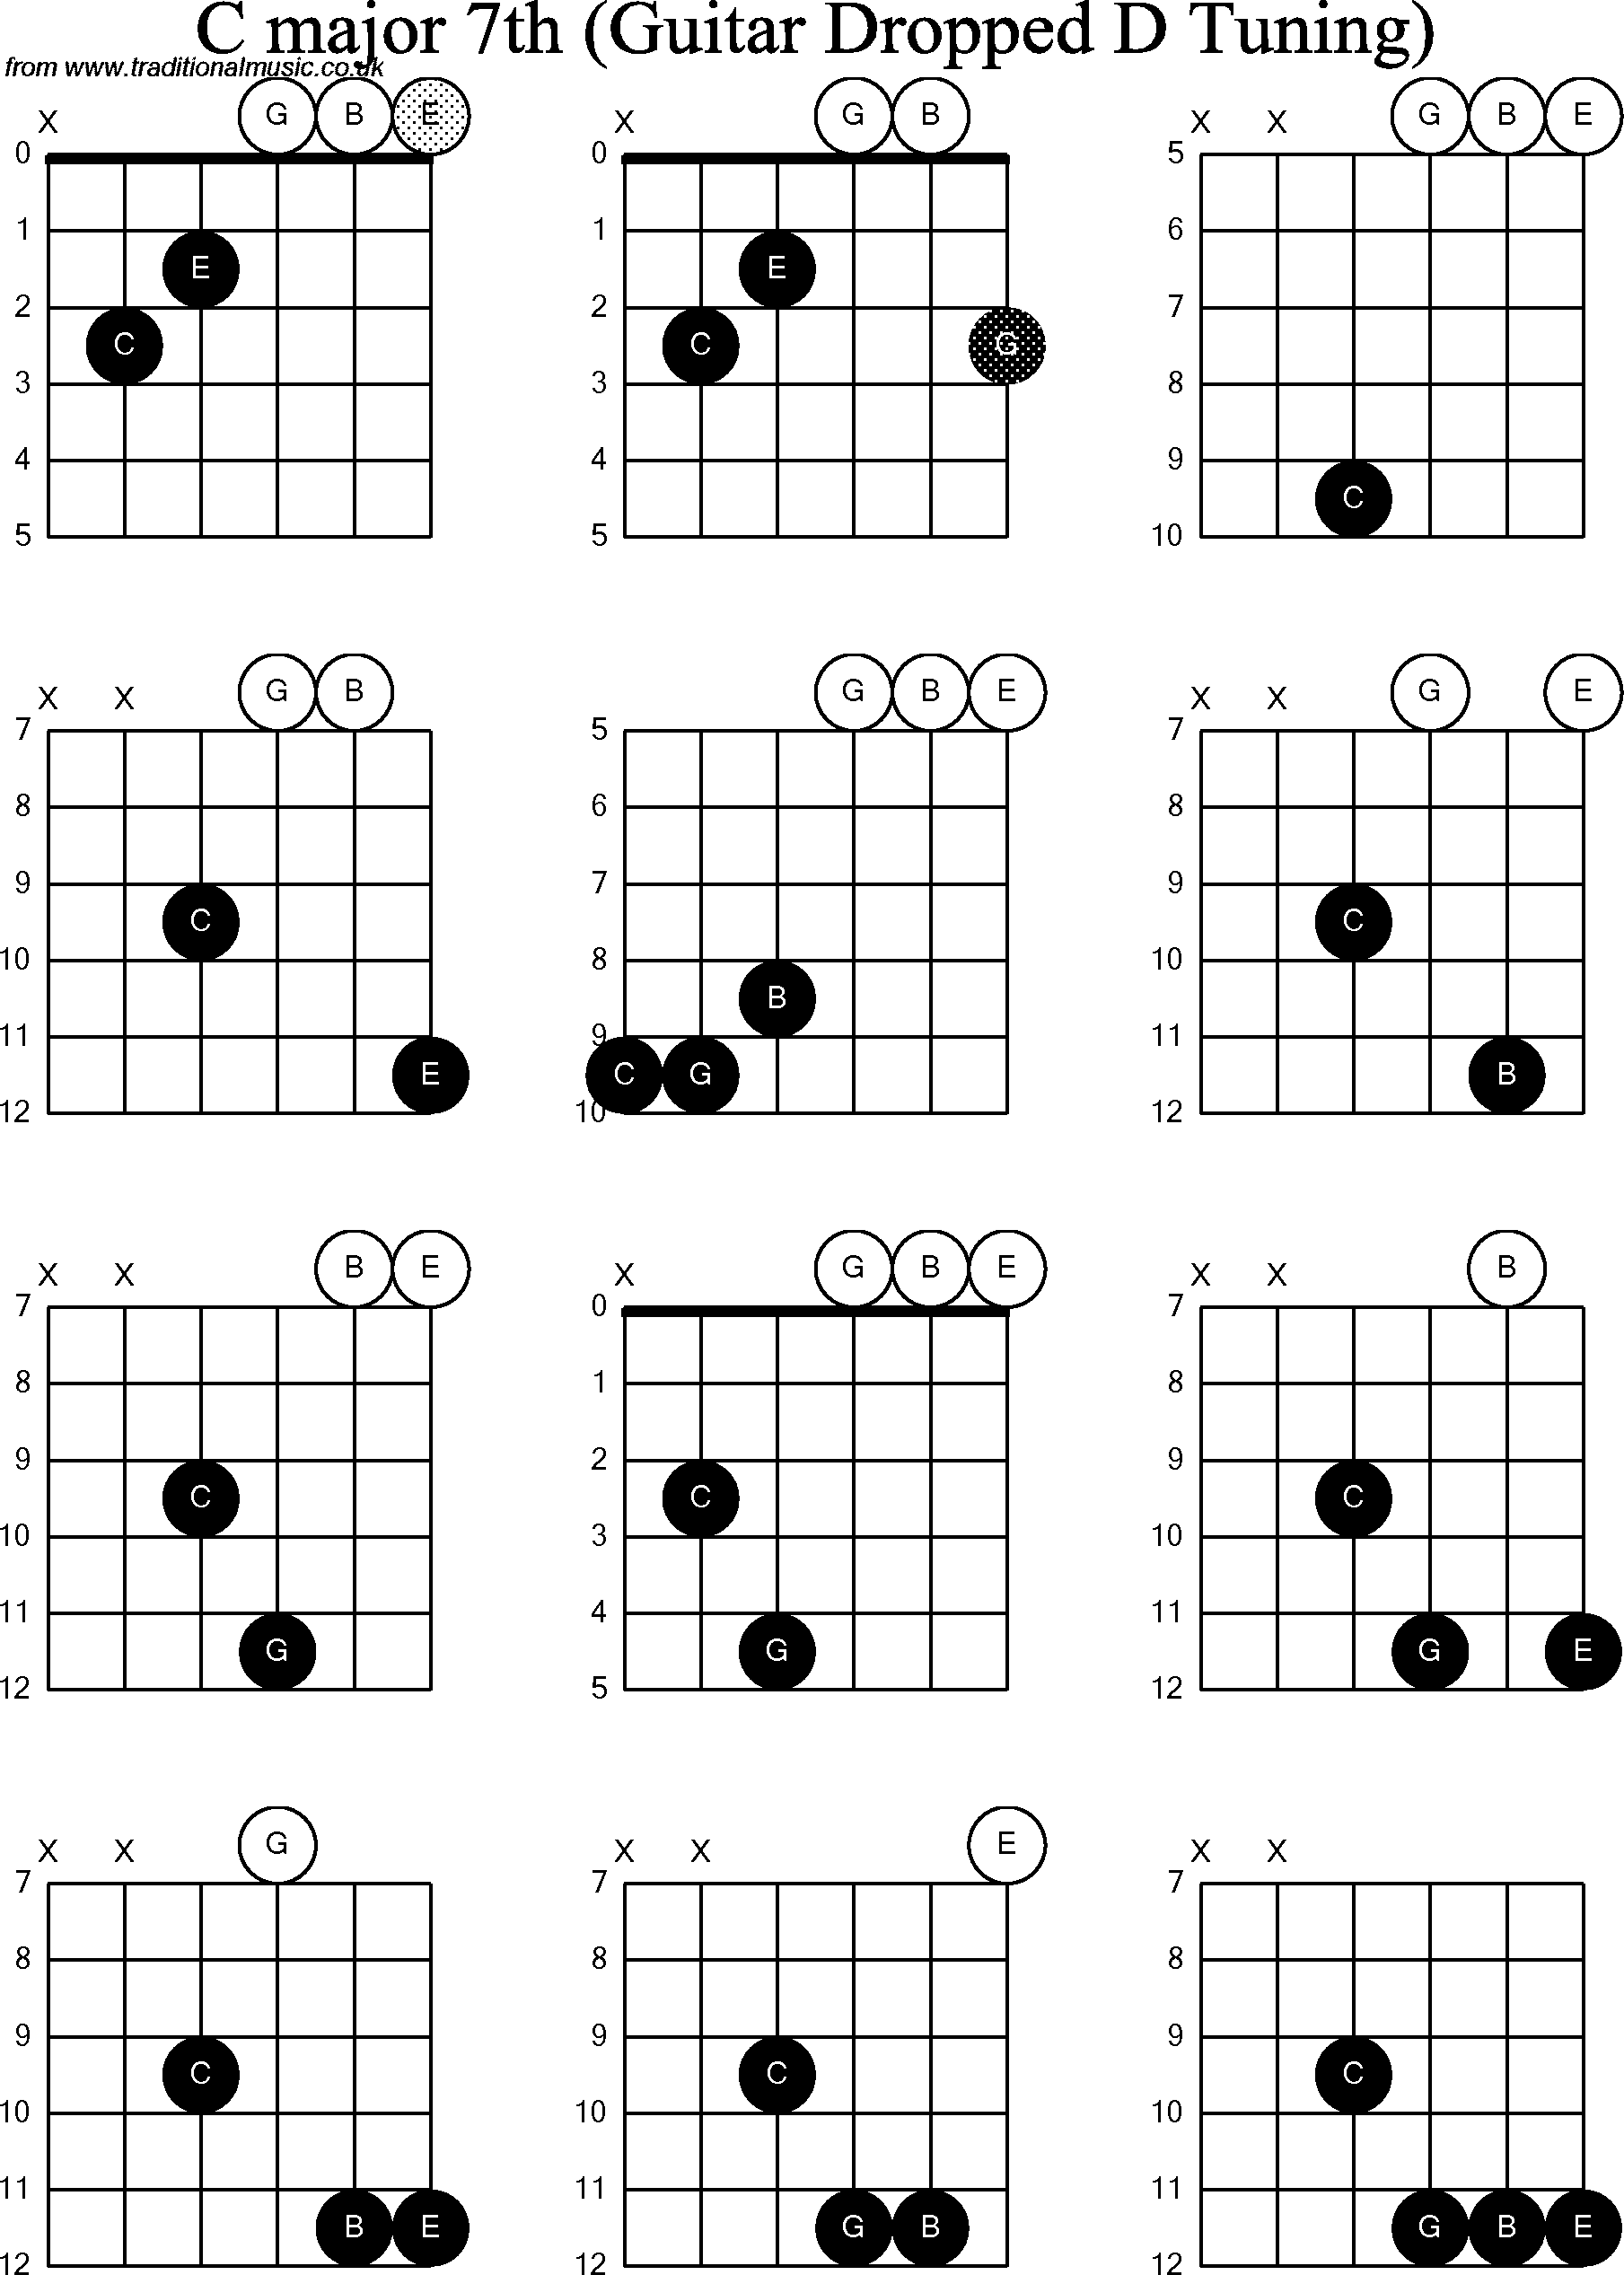 Chord diagrams for Dropped D Guitar(DADGBE), A6th